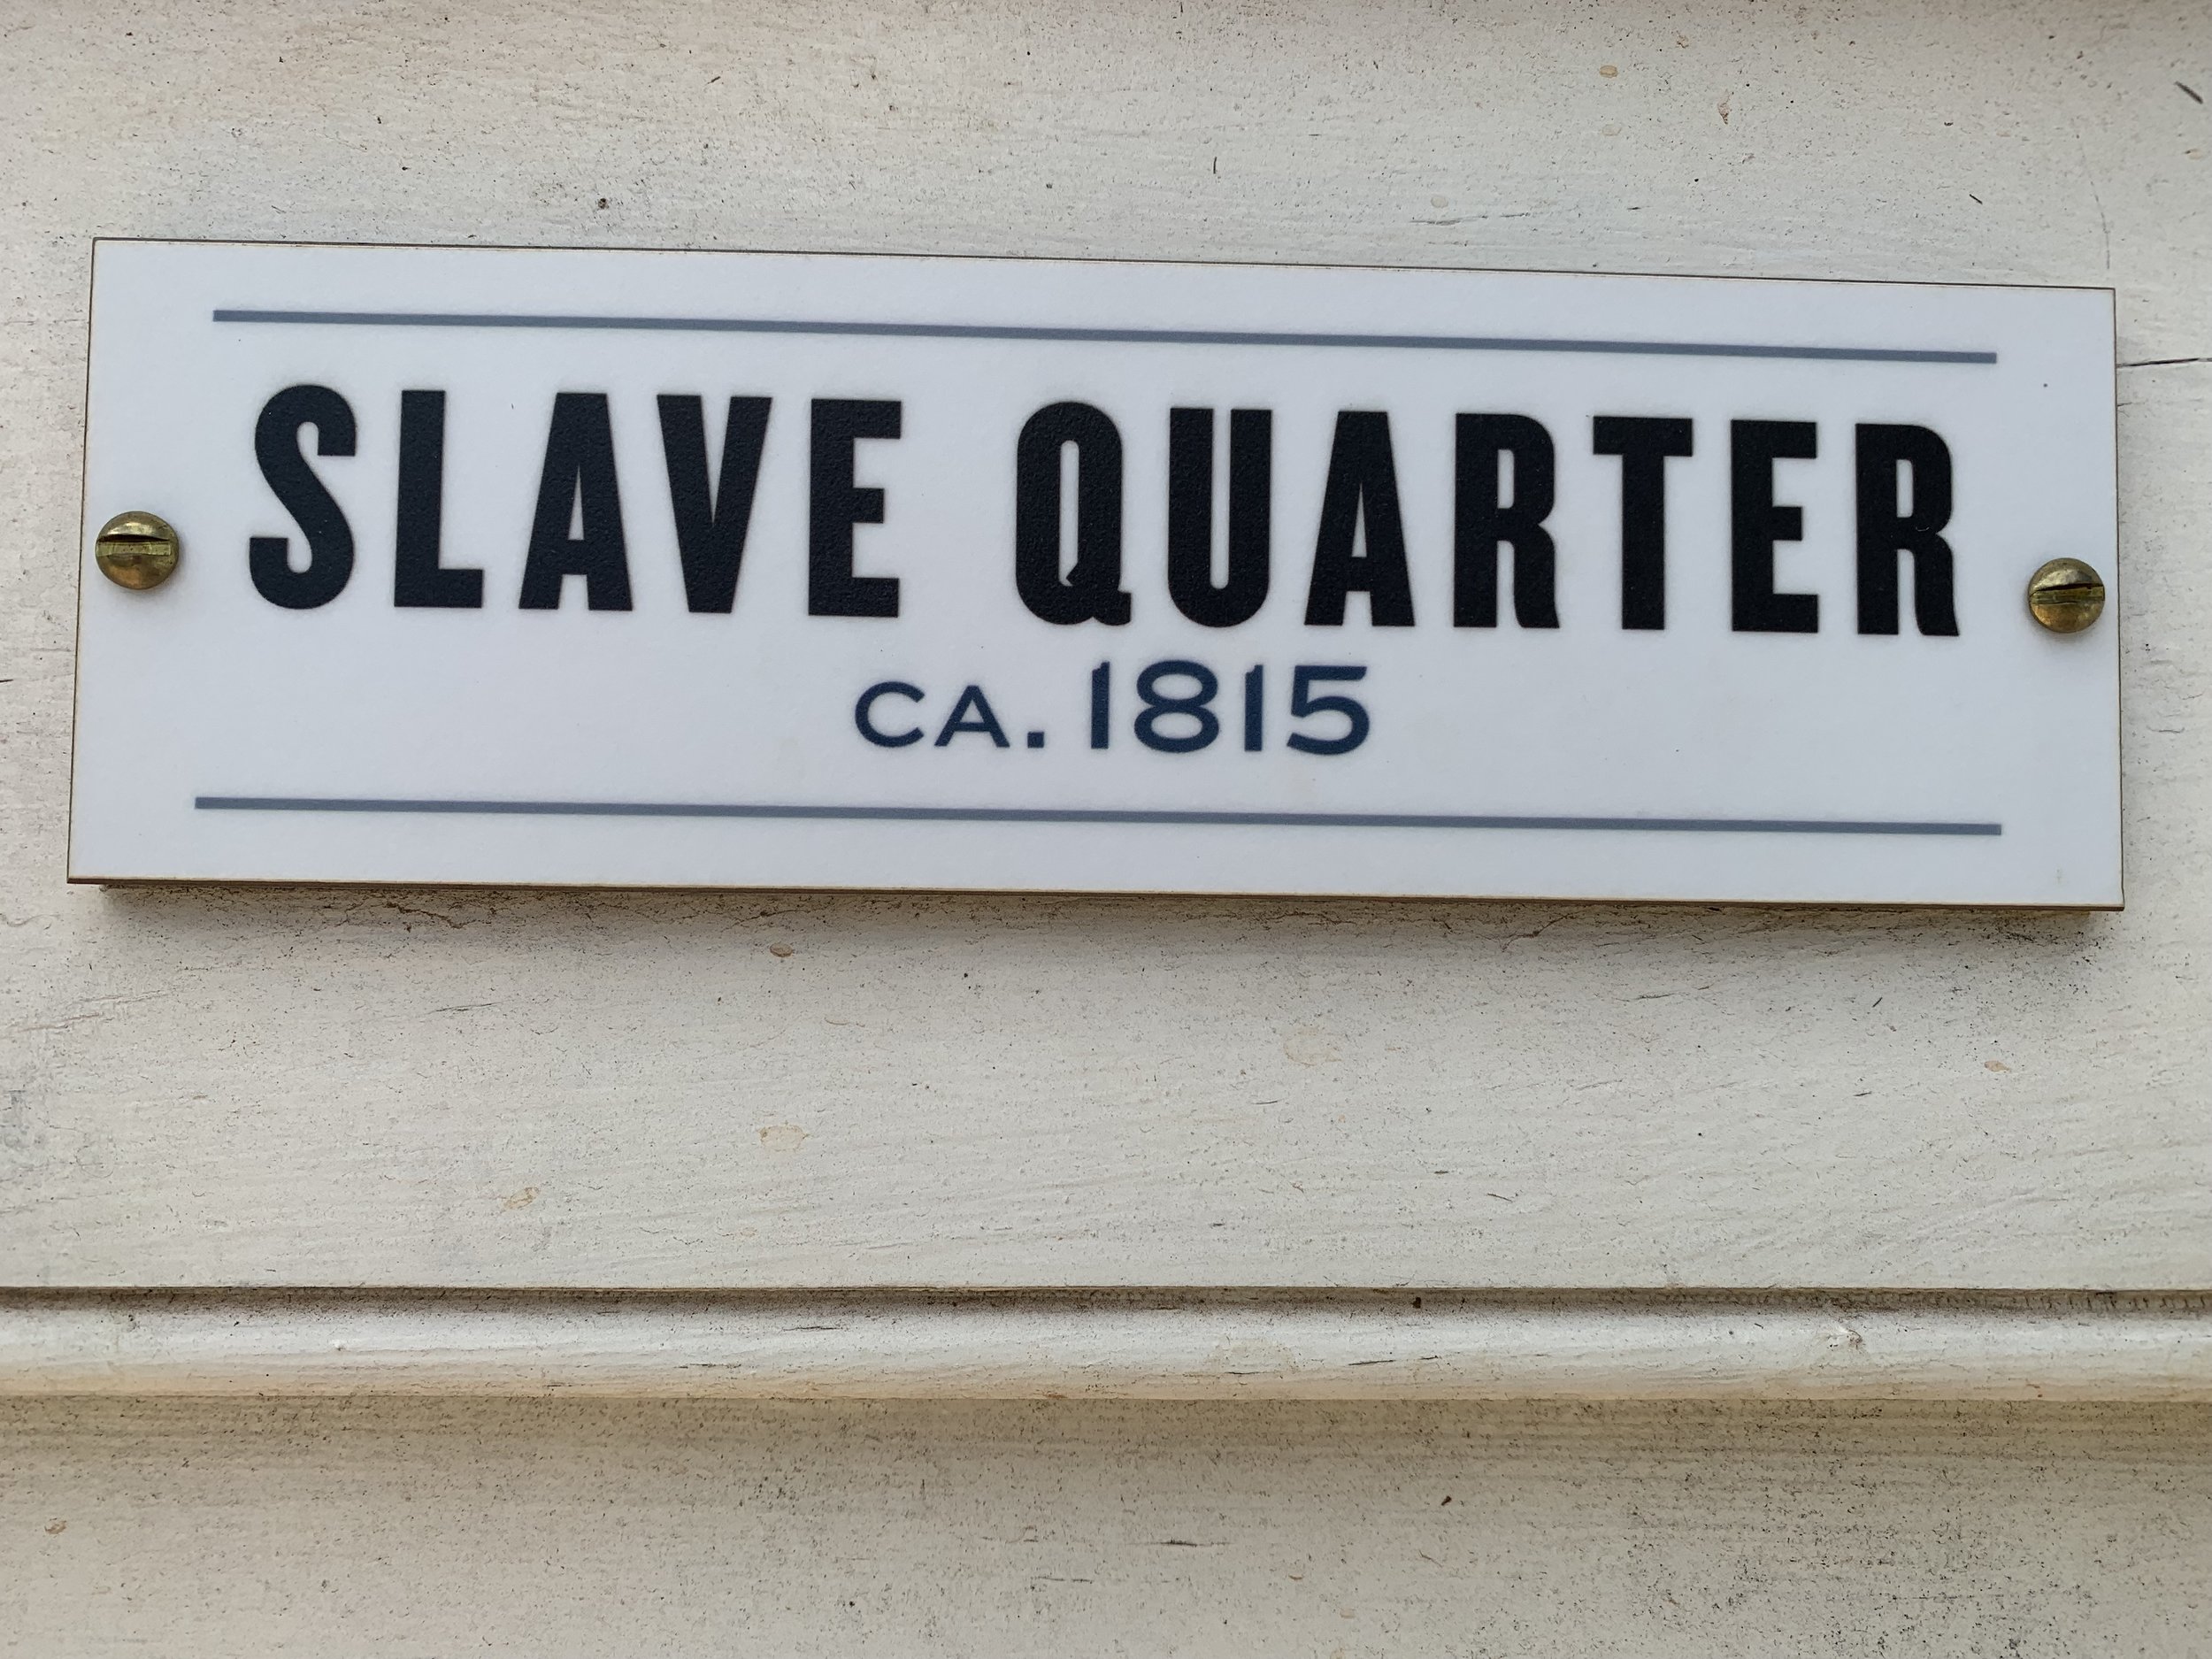  Slave Quarter, Montpelier. Created by  Proun Design , The Montpelier Foundation. Photo by Renée Ater, August 2019. 